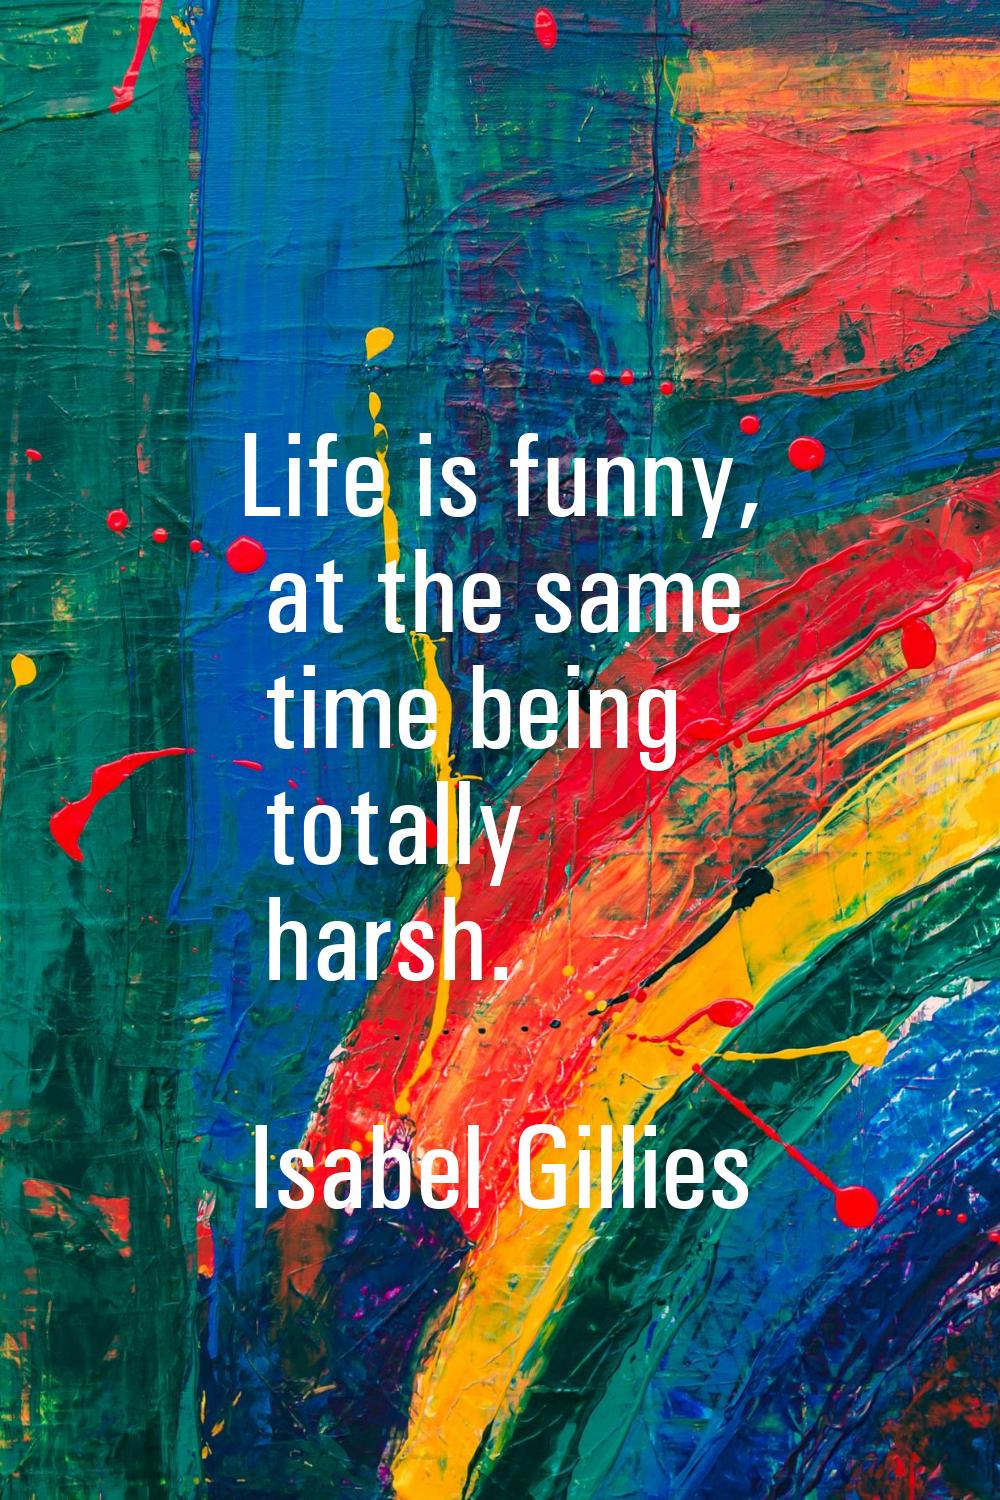 Life is funny, at the same time being totally harsh.